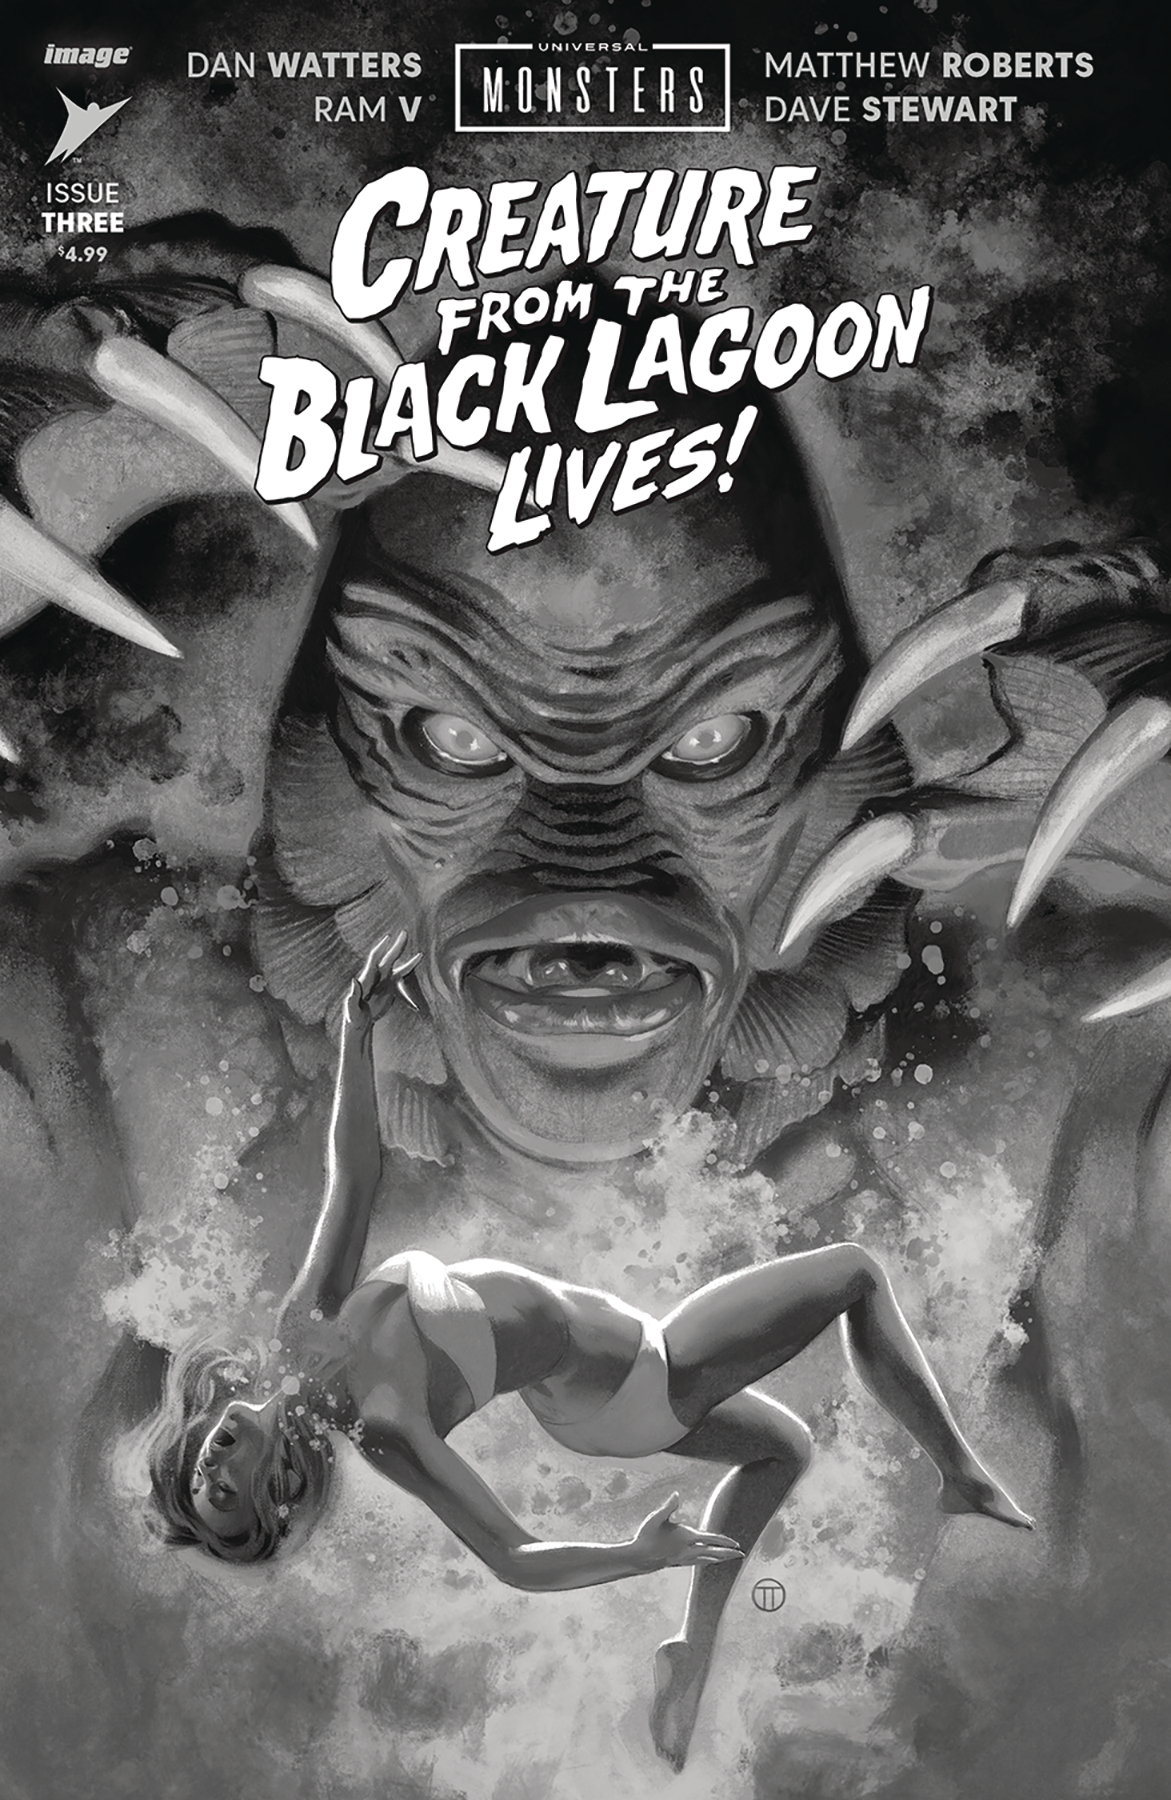 Universal Monsters the Creature from the Black Lagoon Lives #3 Cover D 1 for 25 Incentive Julian Totino Ted (Of 4)